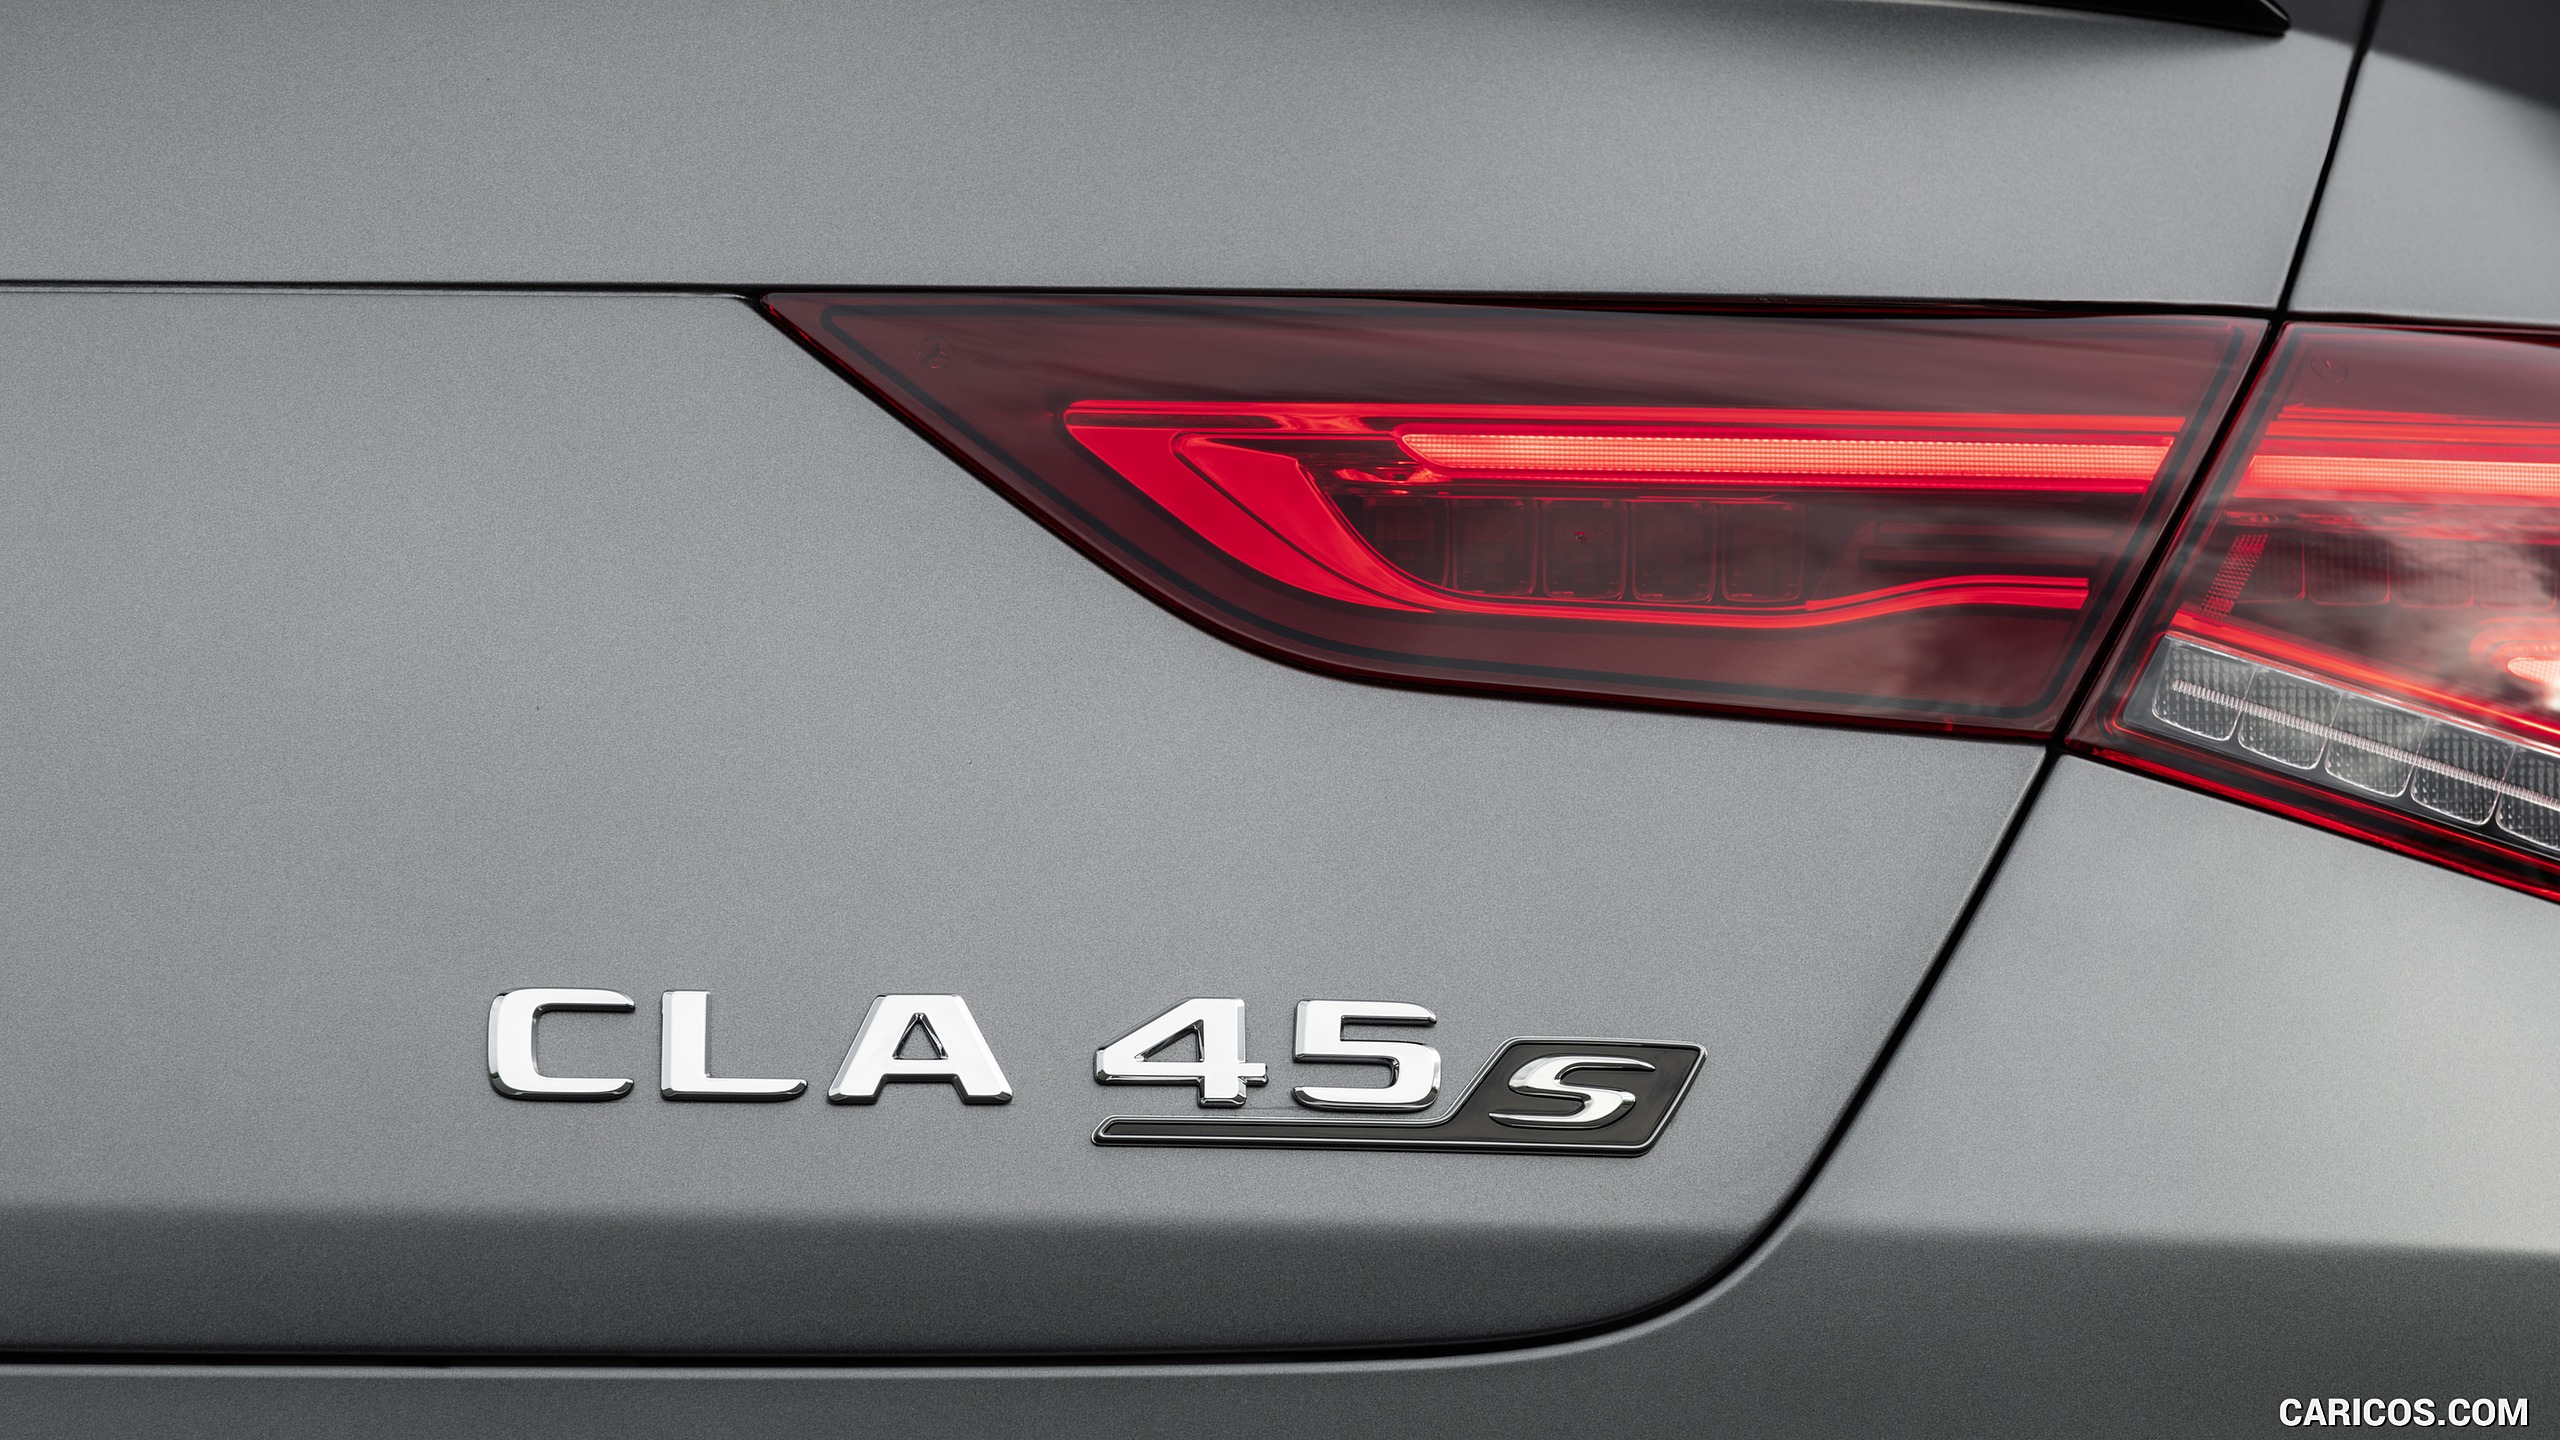 2020 Mercedes-AMG CLA 45 S 4MATIC+ - Tail Light, #28 of 159